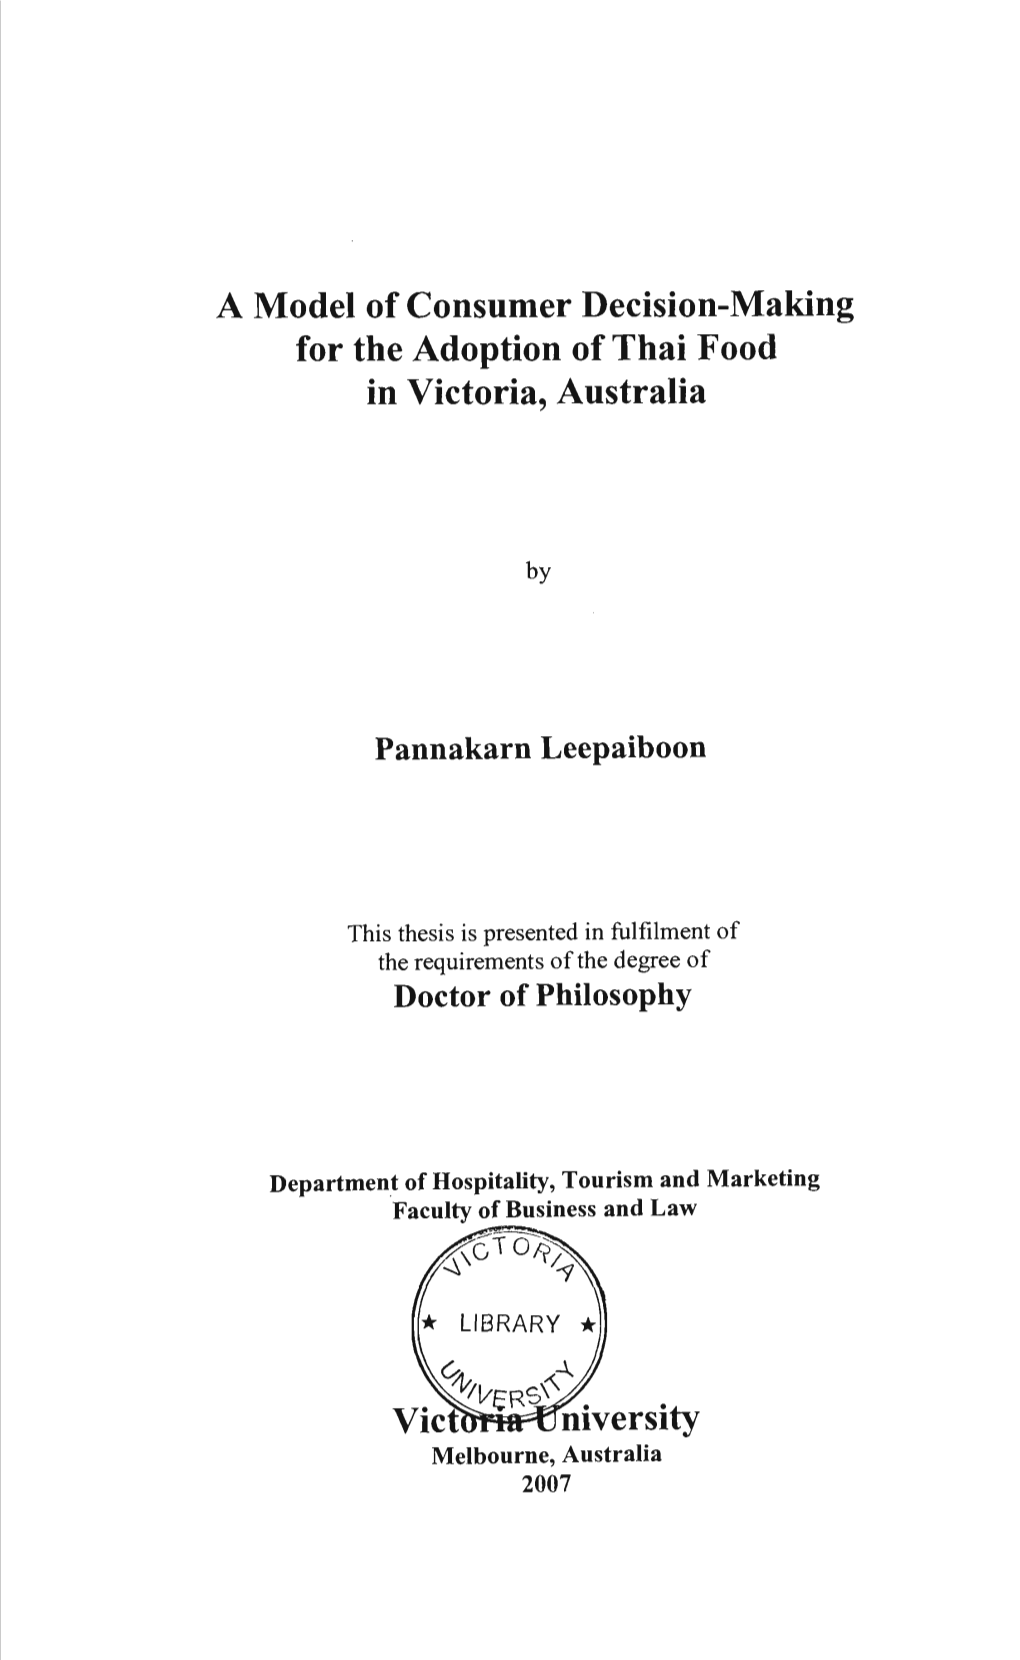 A Model of Consumer Decision-Making for the Adoption of Thai Food in Victoria, Australia